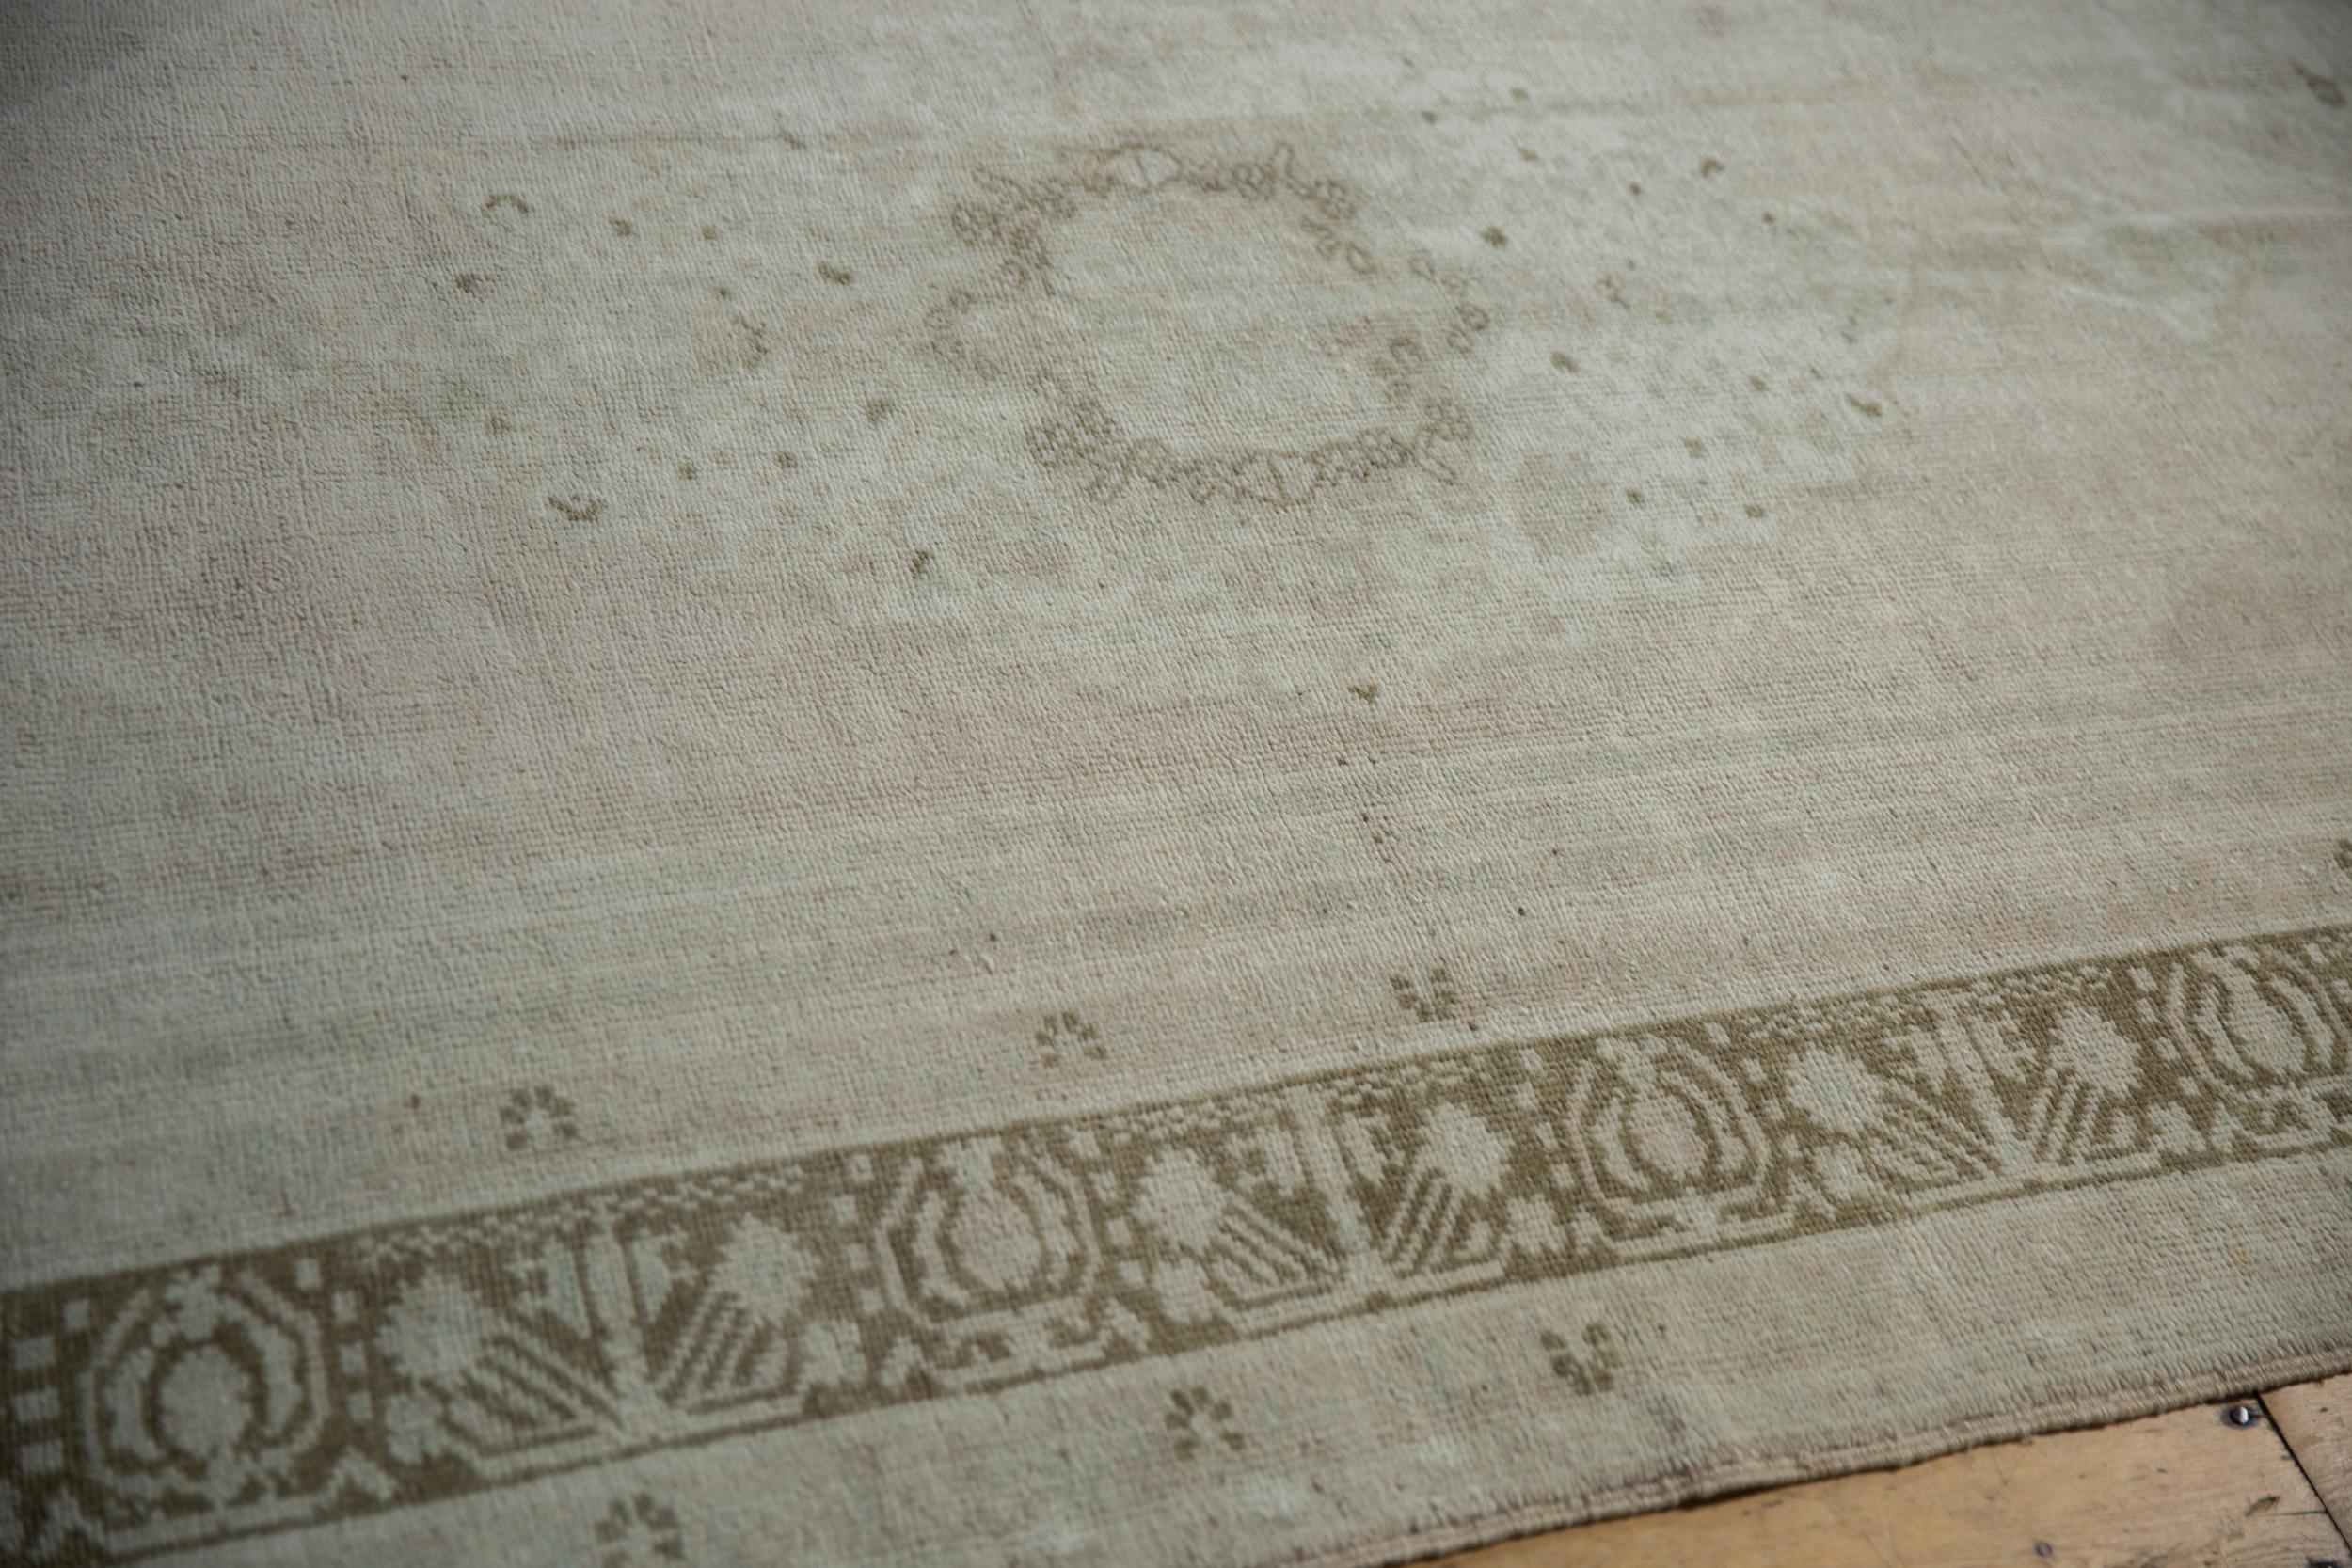 Late 20th Century Vintage Distressed Oushak Carpet For Sale